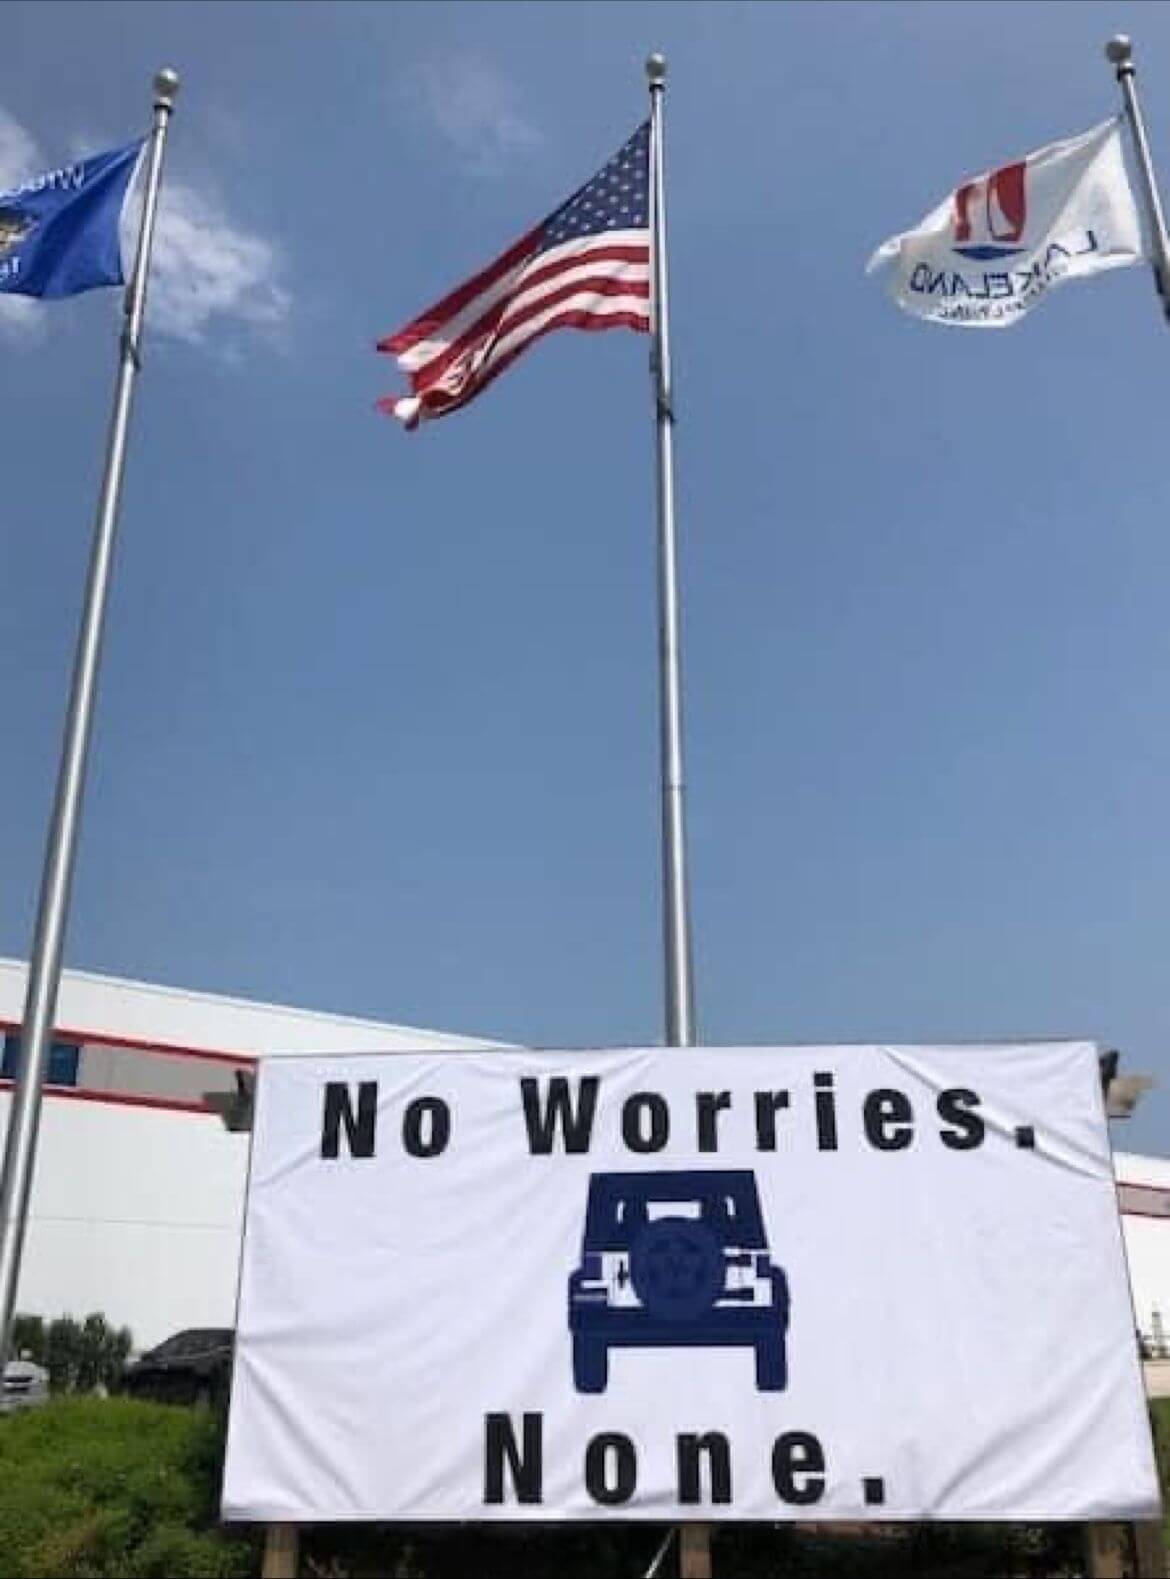 Hwy Banner: No Worries. None.